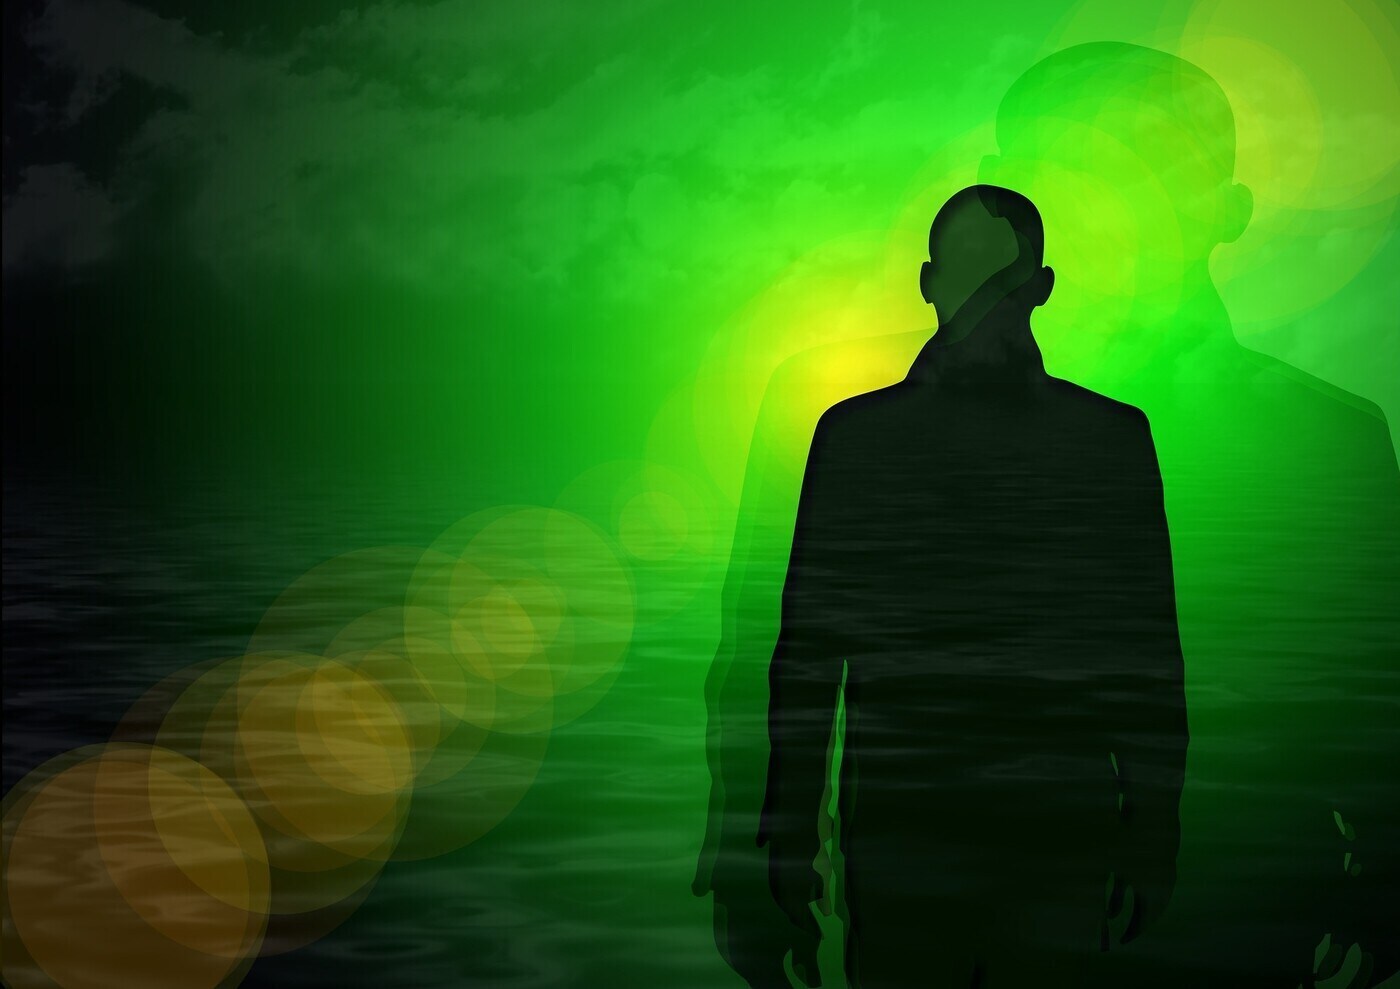 Silhouette of man, representing the soul, on green background